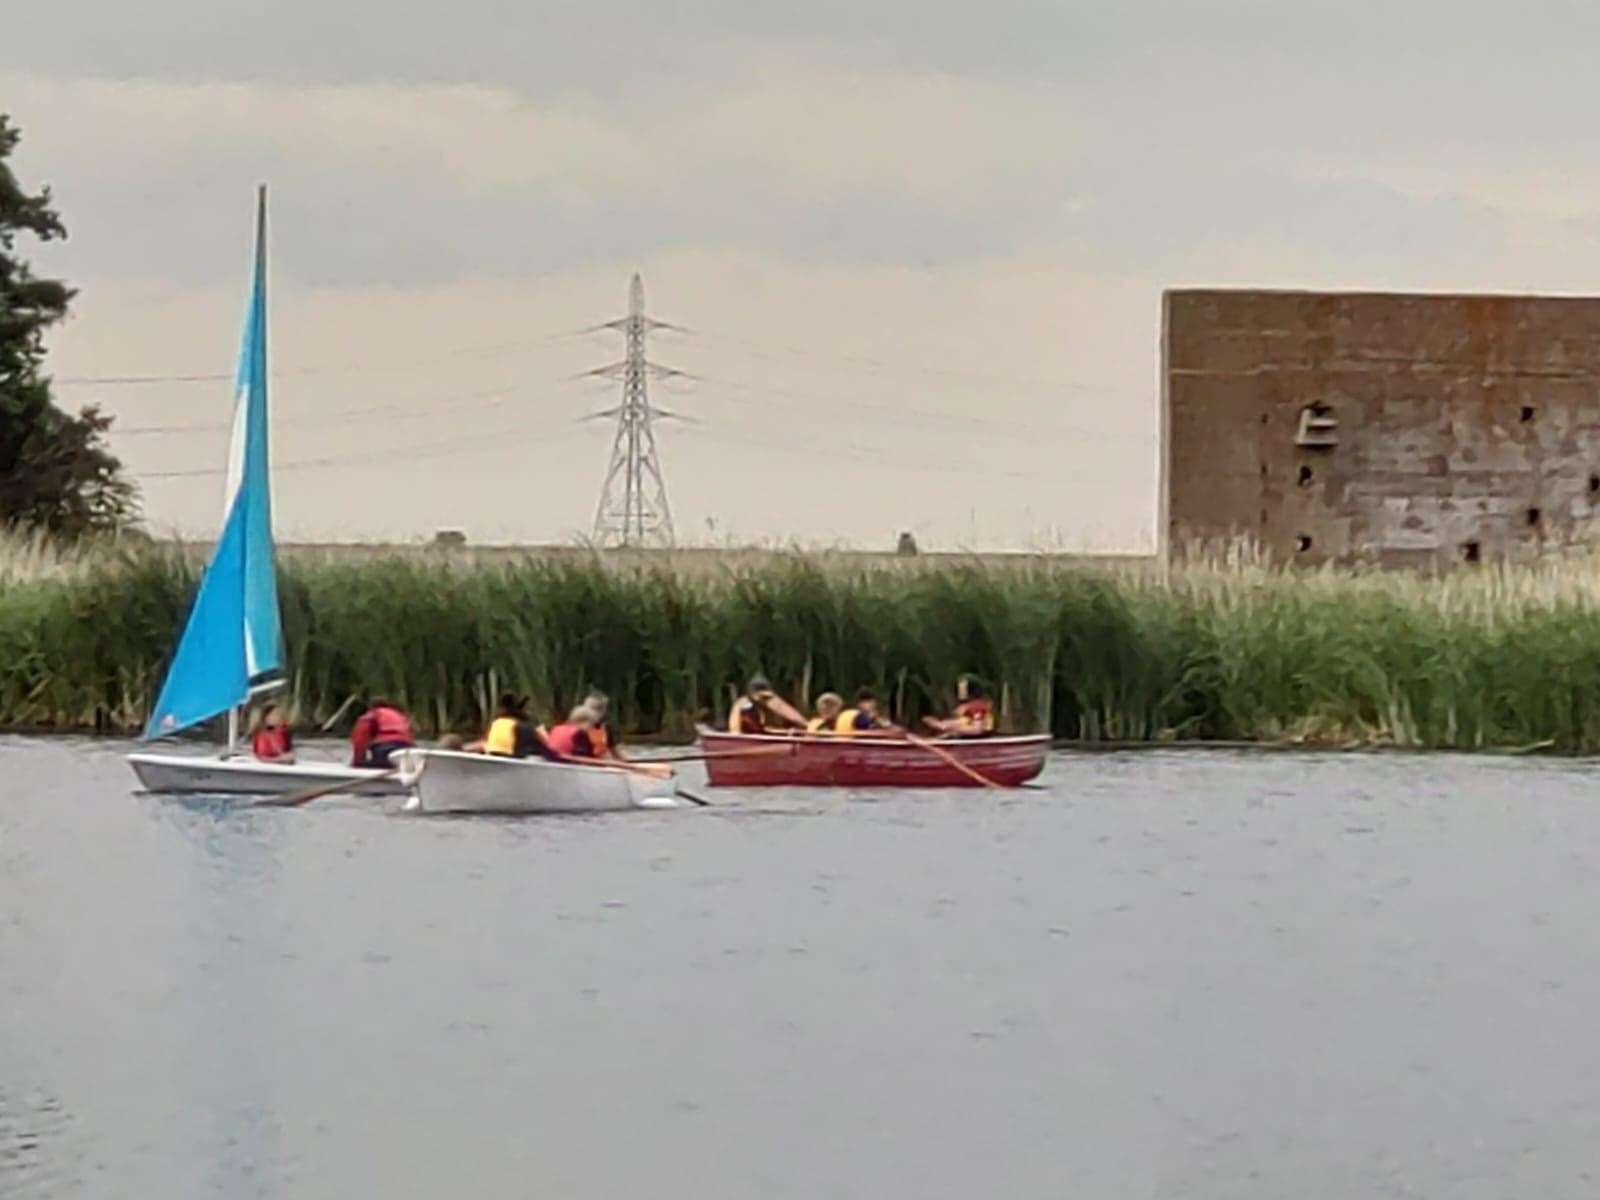 The 8th Faversham Sea Scouts Group sailing on Faversham Lakes near to the site of their proposed new HQ. Photo: Andrew White